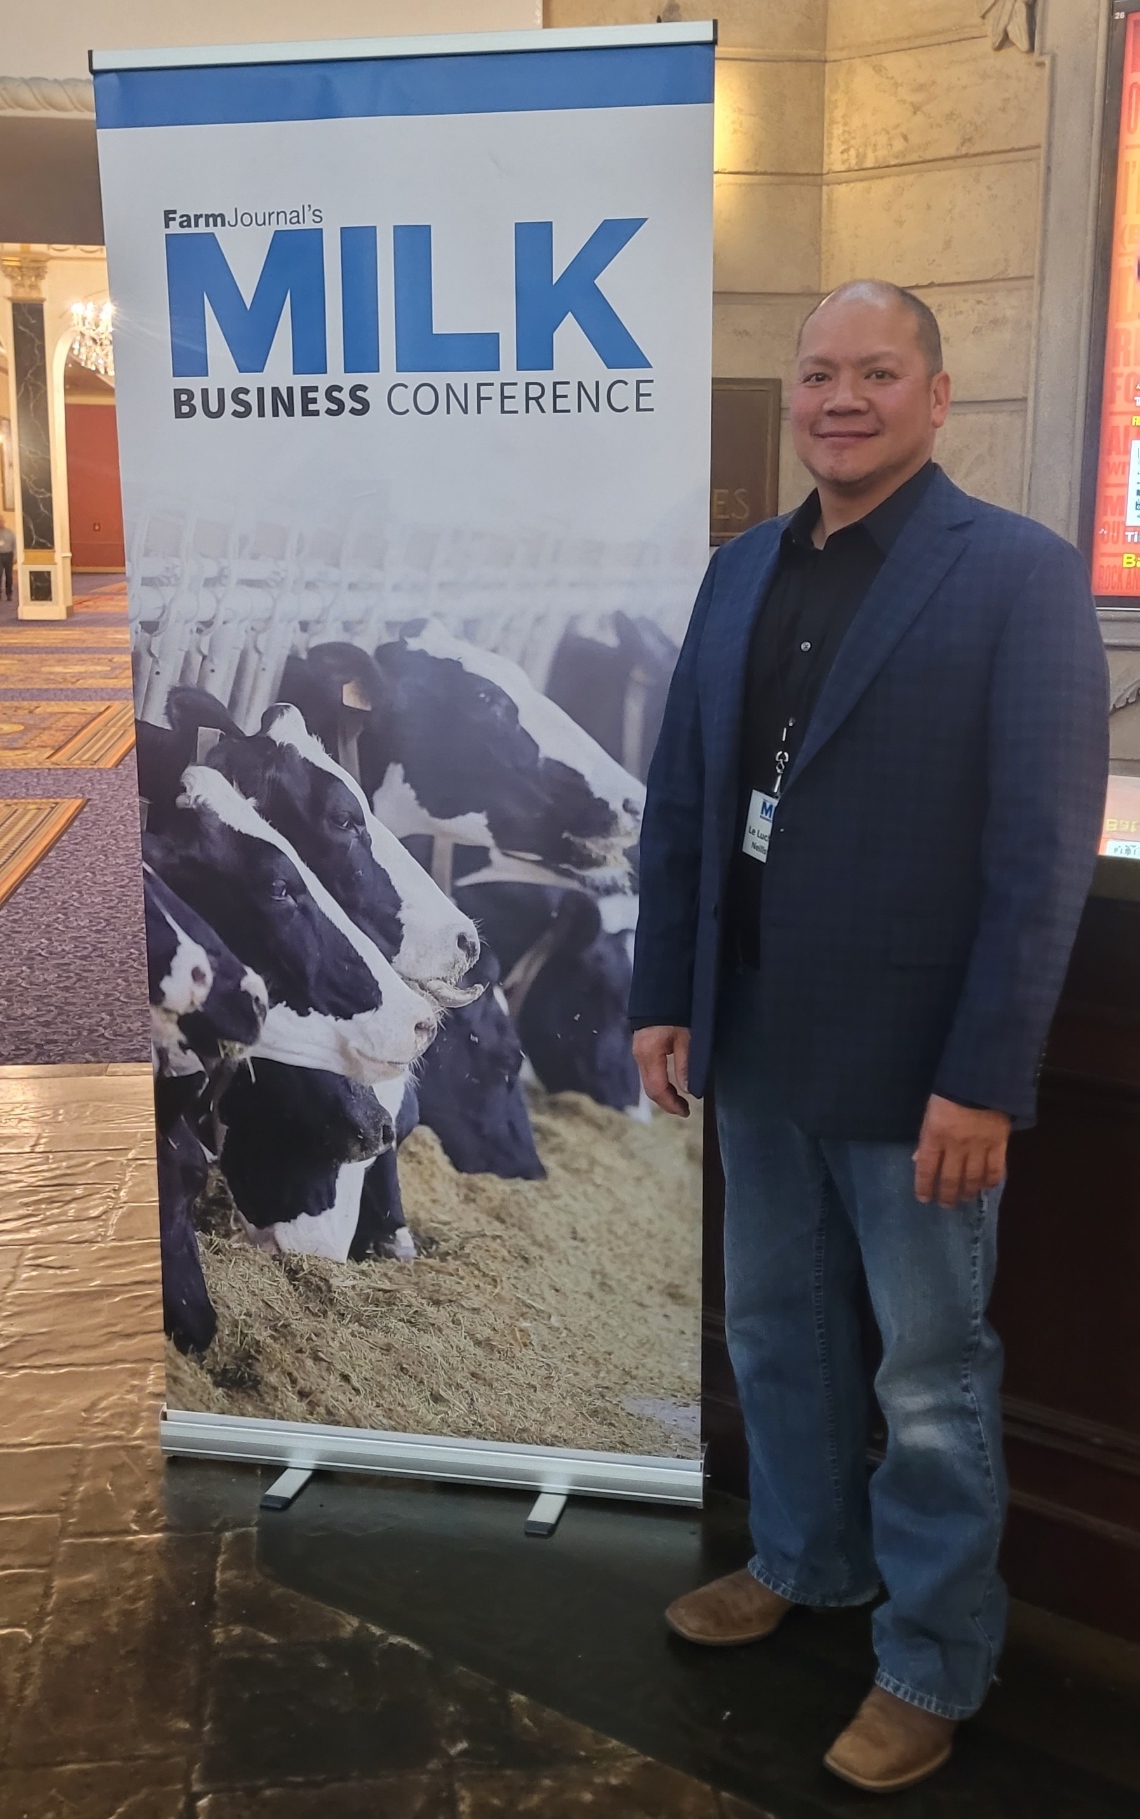 MILK Business Conference